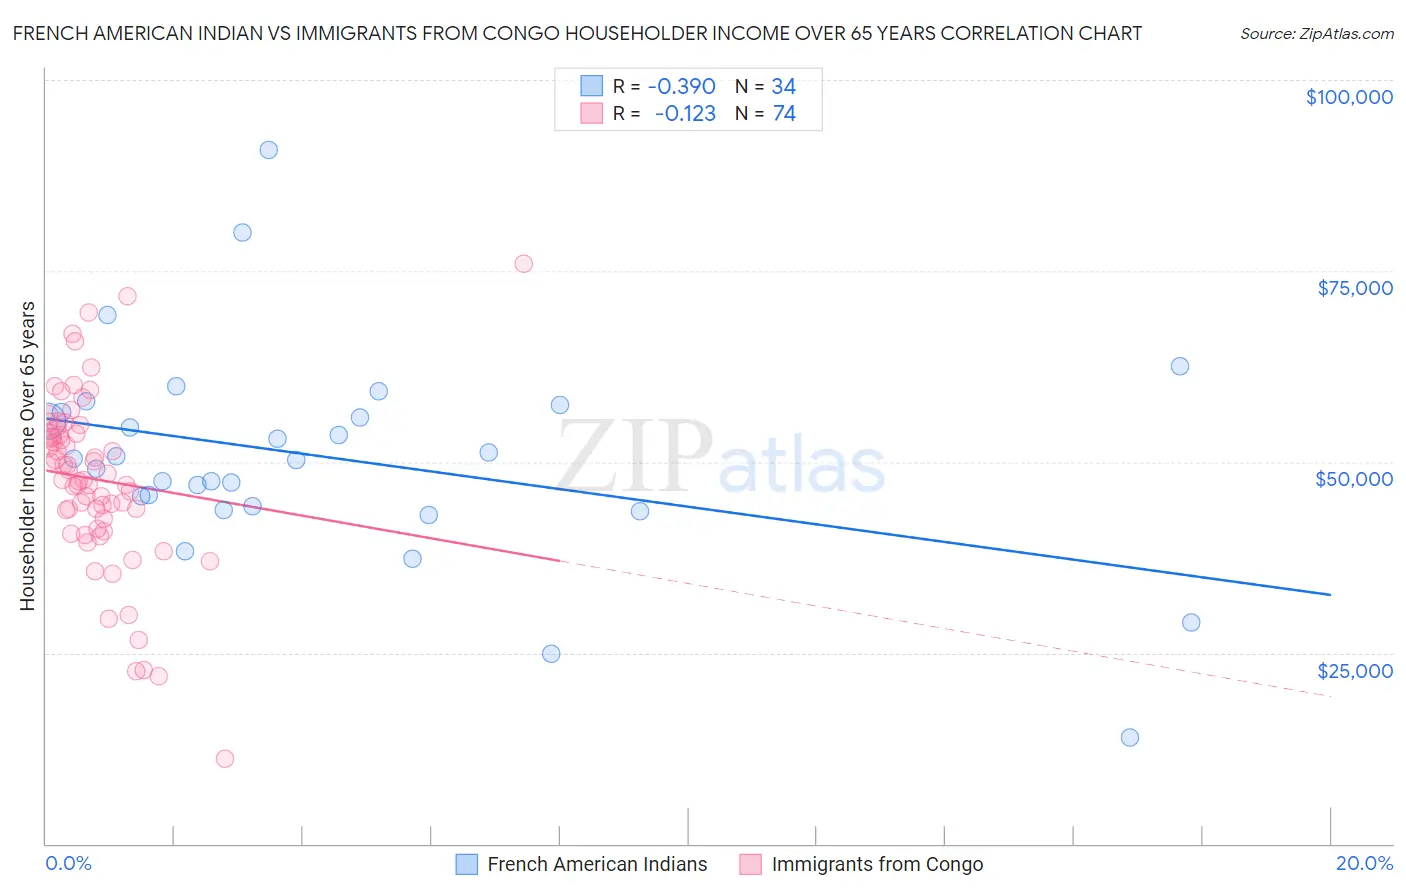 French American Indian vs Immigrants from Congo Householder Income Over 65 years